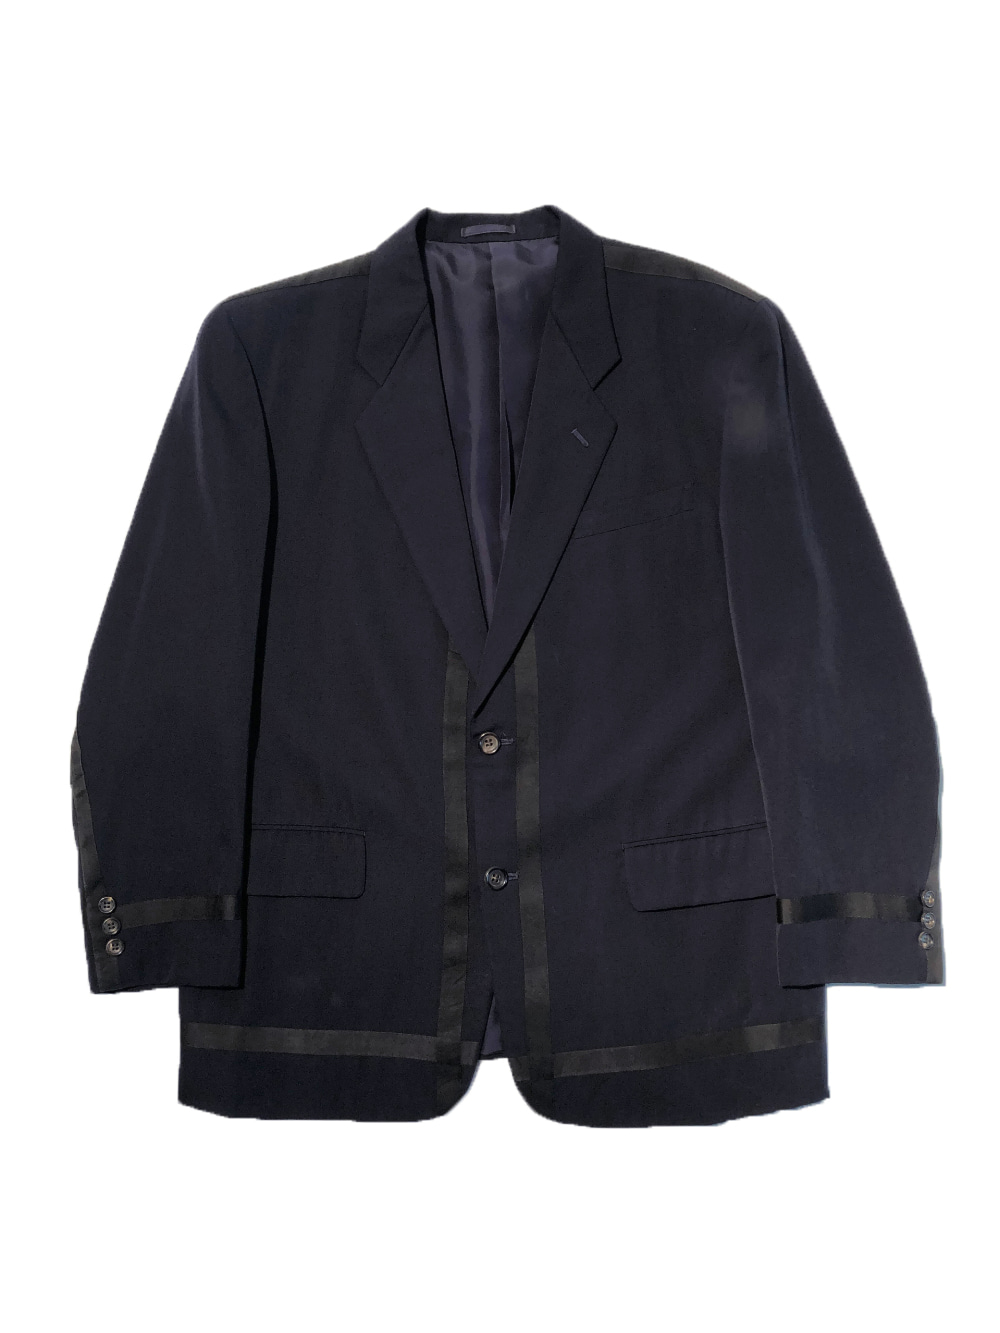 COMME des GARCONS HOMME PLUS 1989aw taping blazer